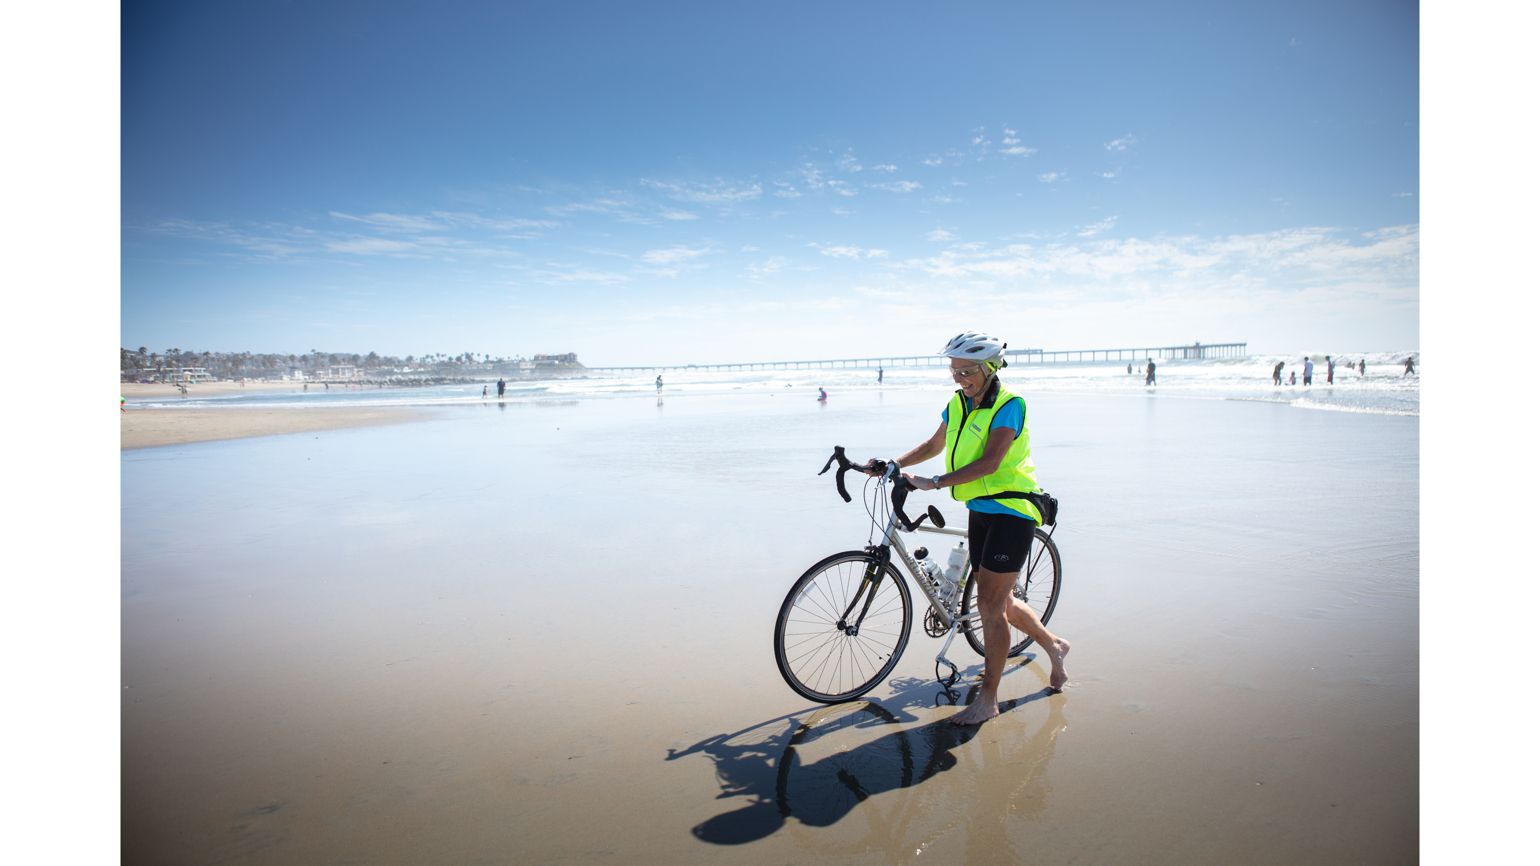 Carol Garsee, Cancer survivor, at Dog Beach, San Diego – All finished her cross country bike ride to the Pacific Ocean.  better living health wellness living longer living better